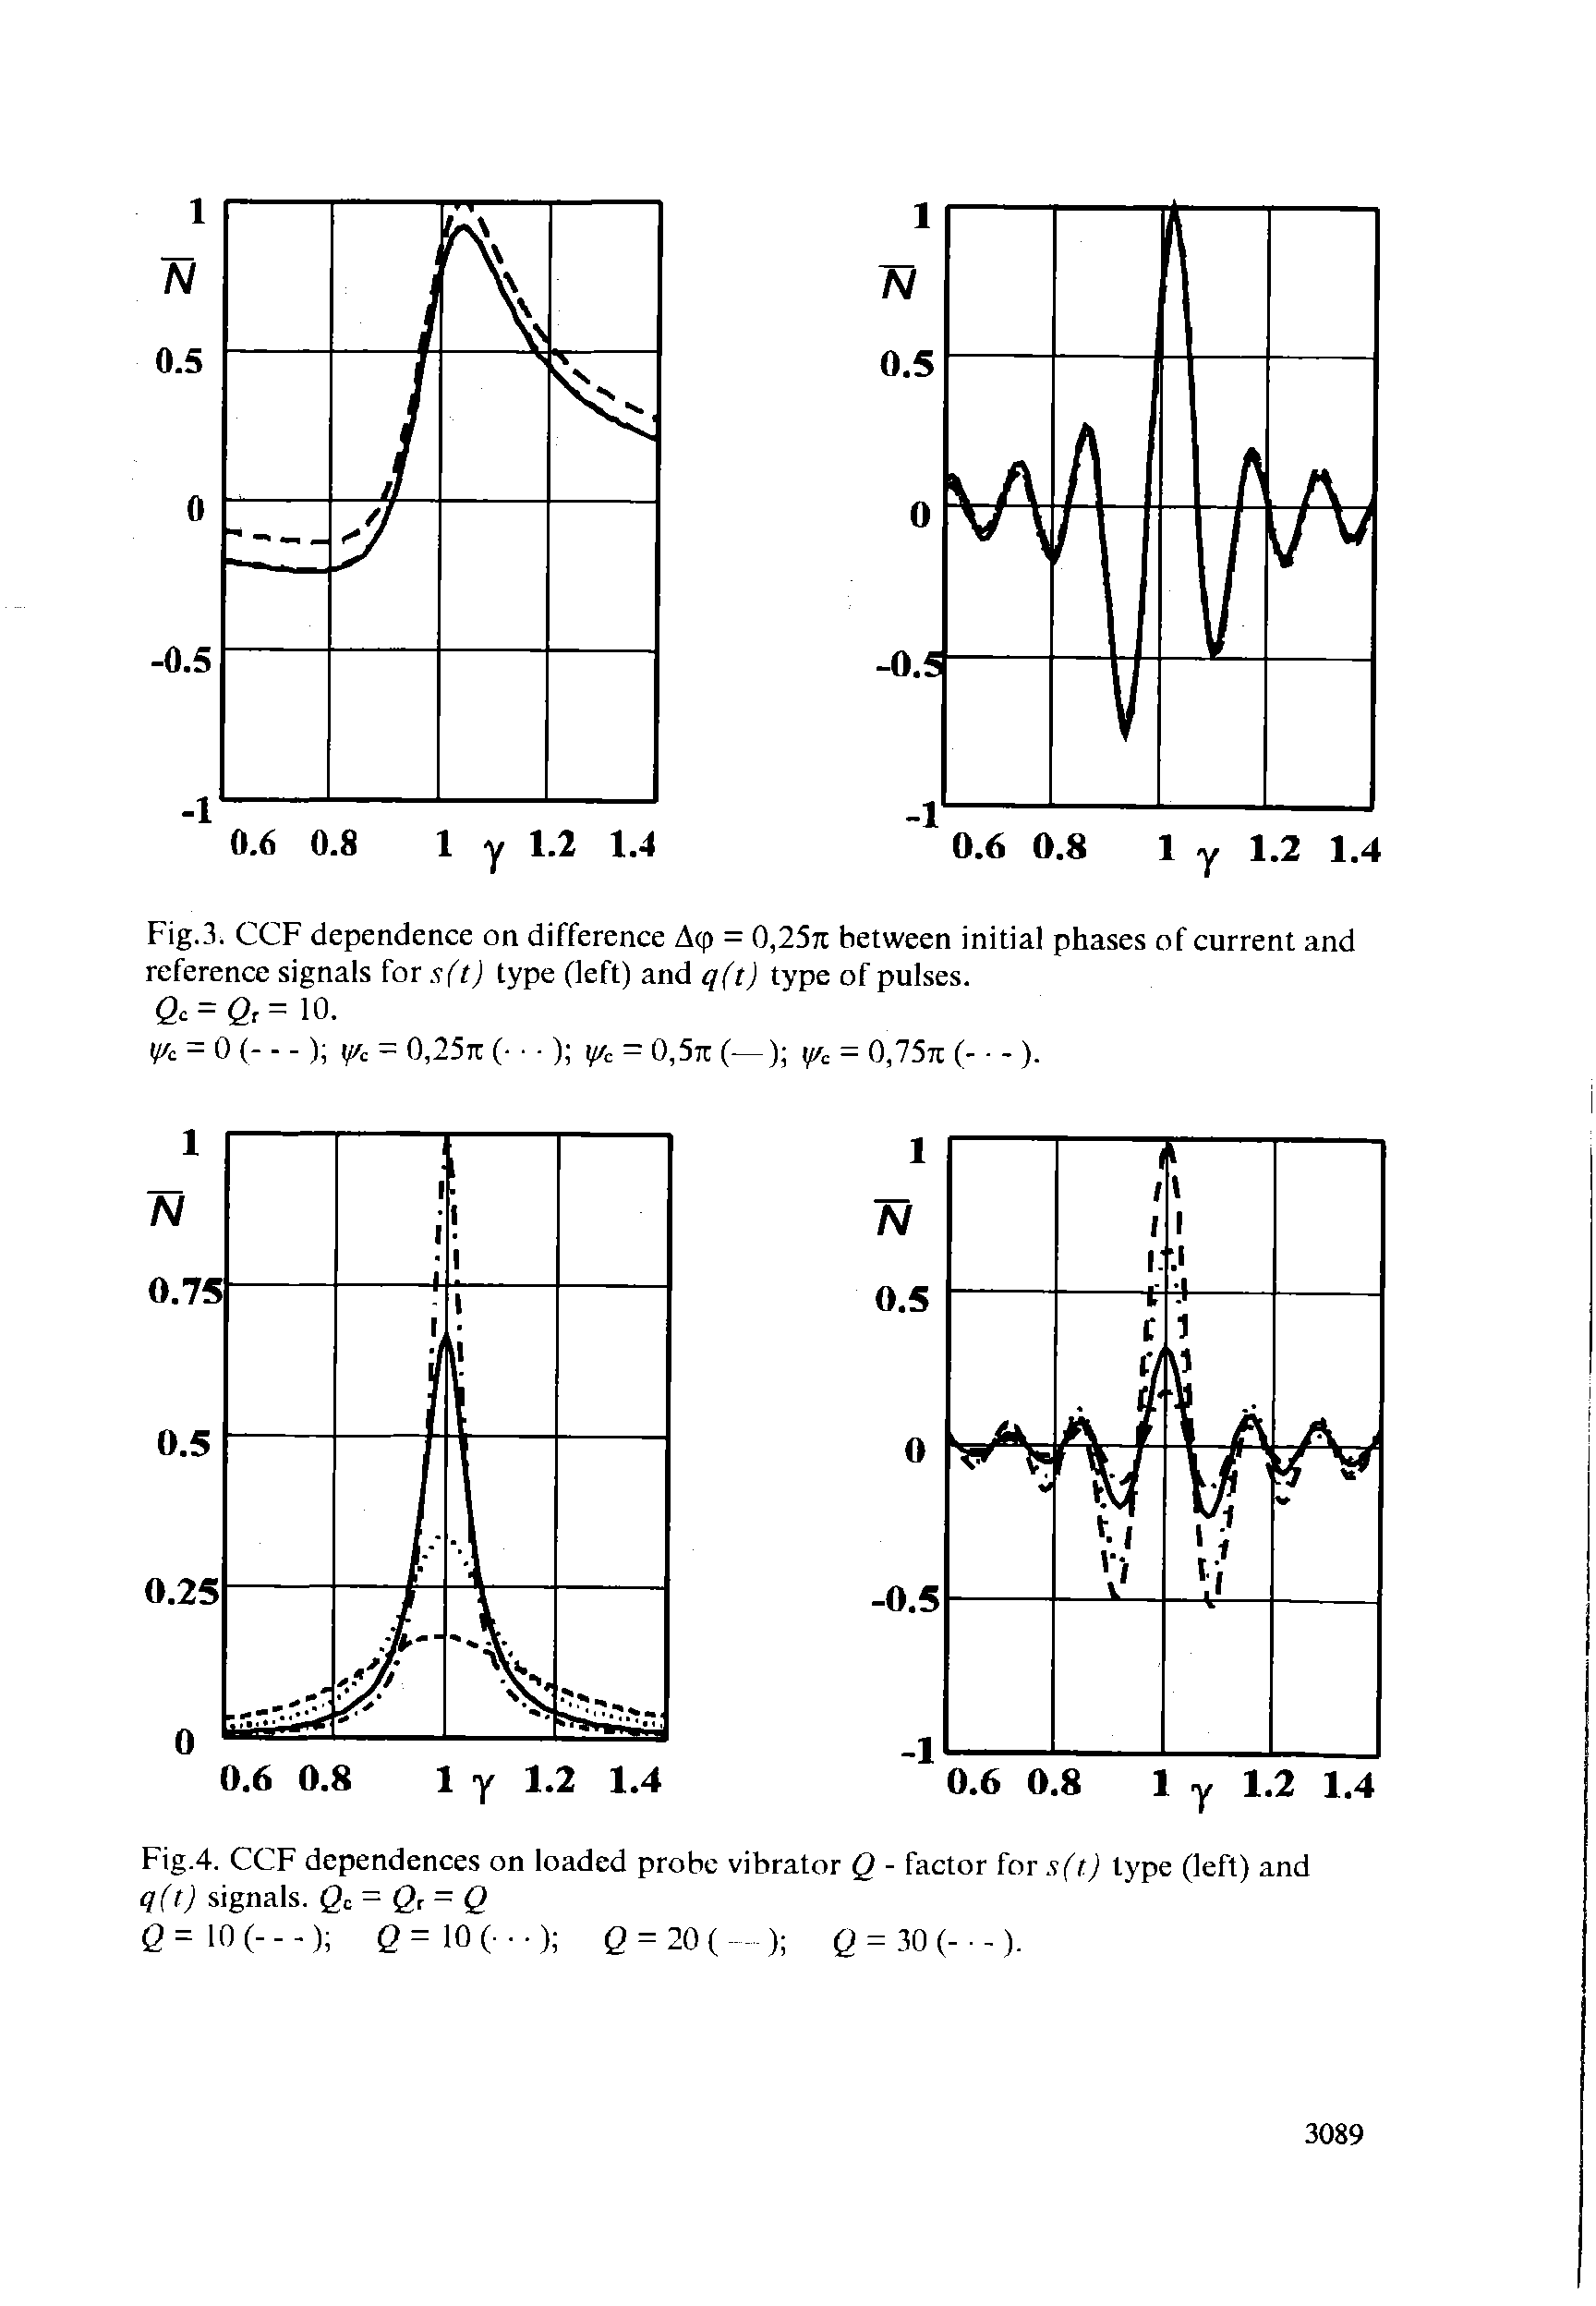 Fig.4. CCF dependences on loaded probe vibrator Q - factor for s(t) type (left) and q(t) signals. Q, = Q...